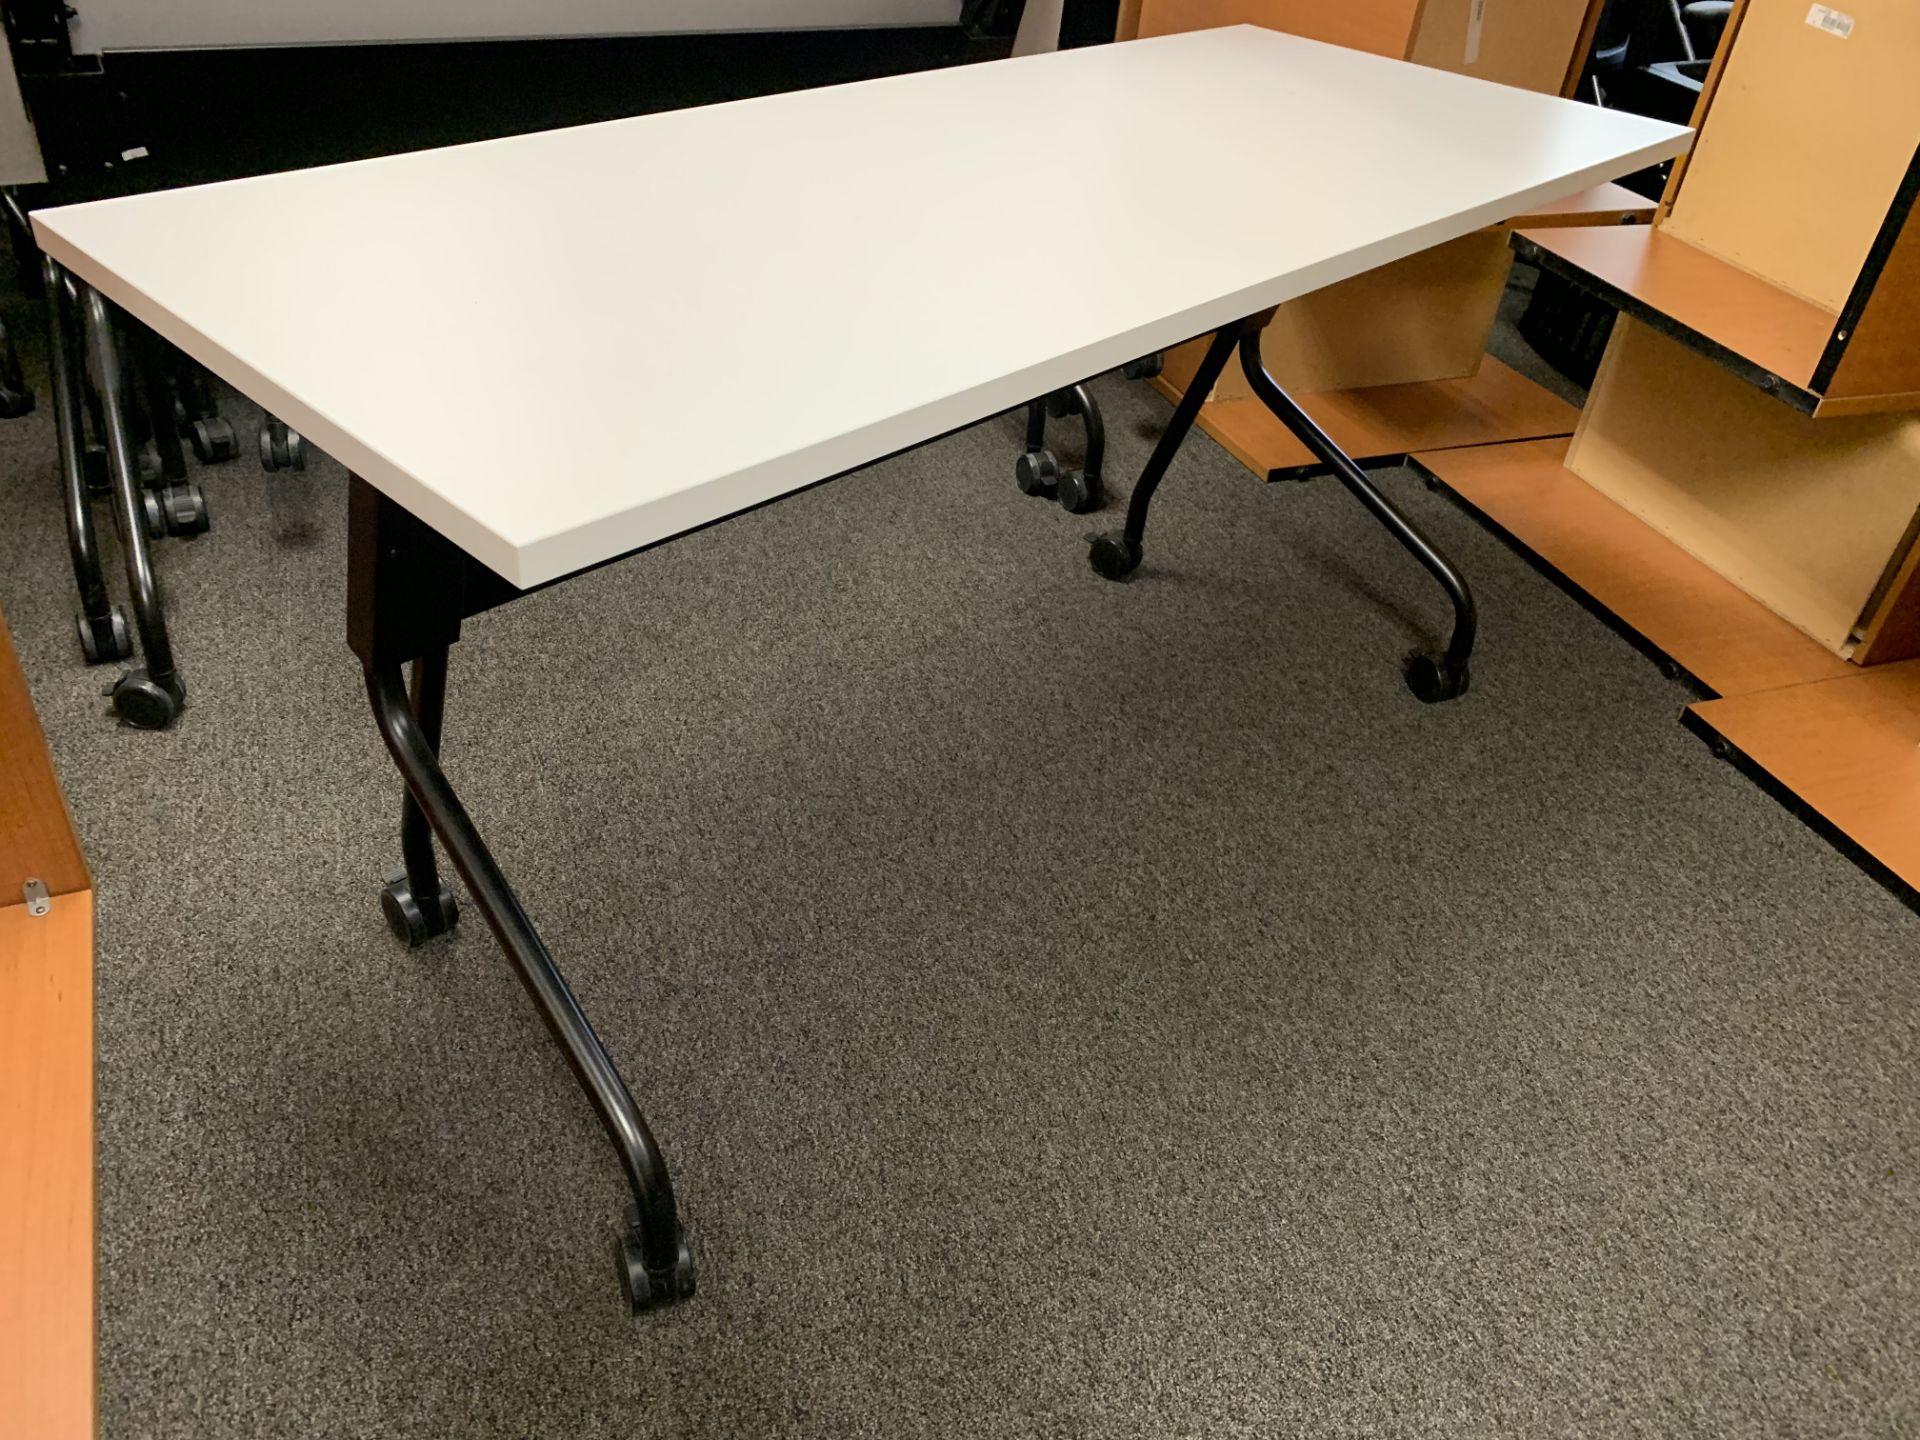 5' x 2' Portable Folding Table on Casters